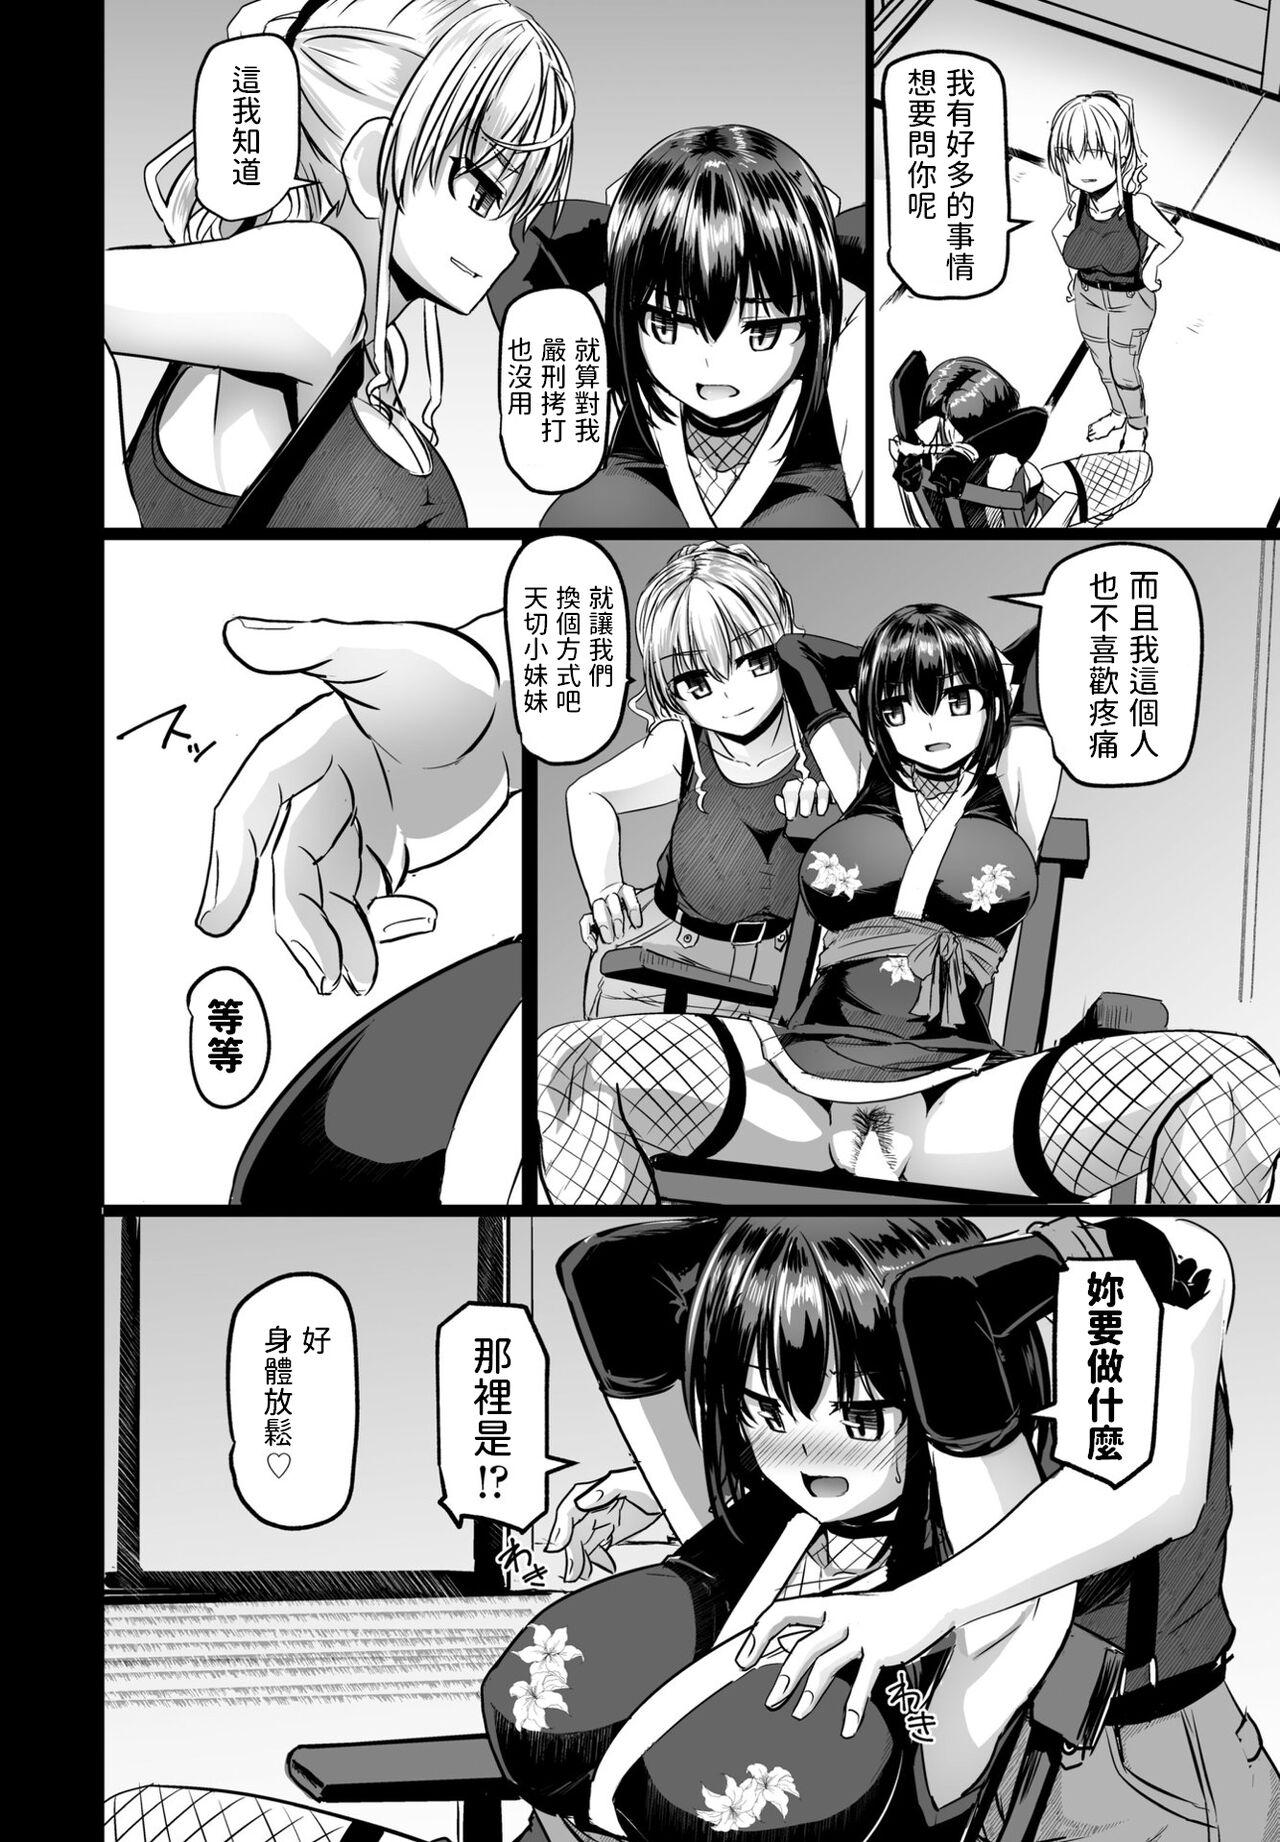 Russia THE NAKASEN DRIVER Ch. 3 Polla - Page 6